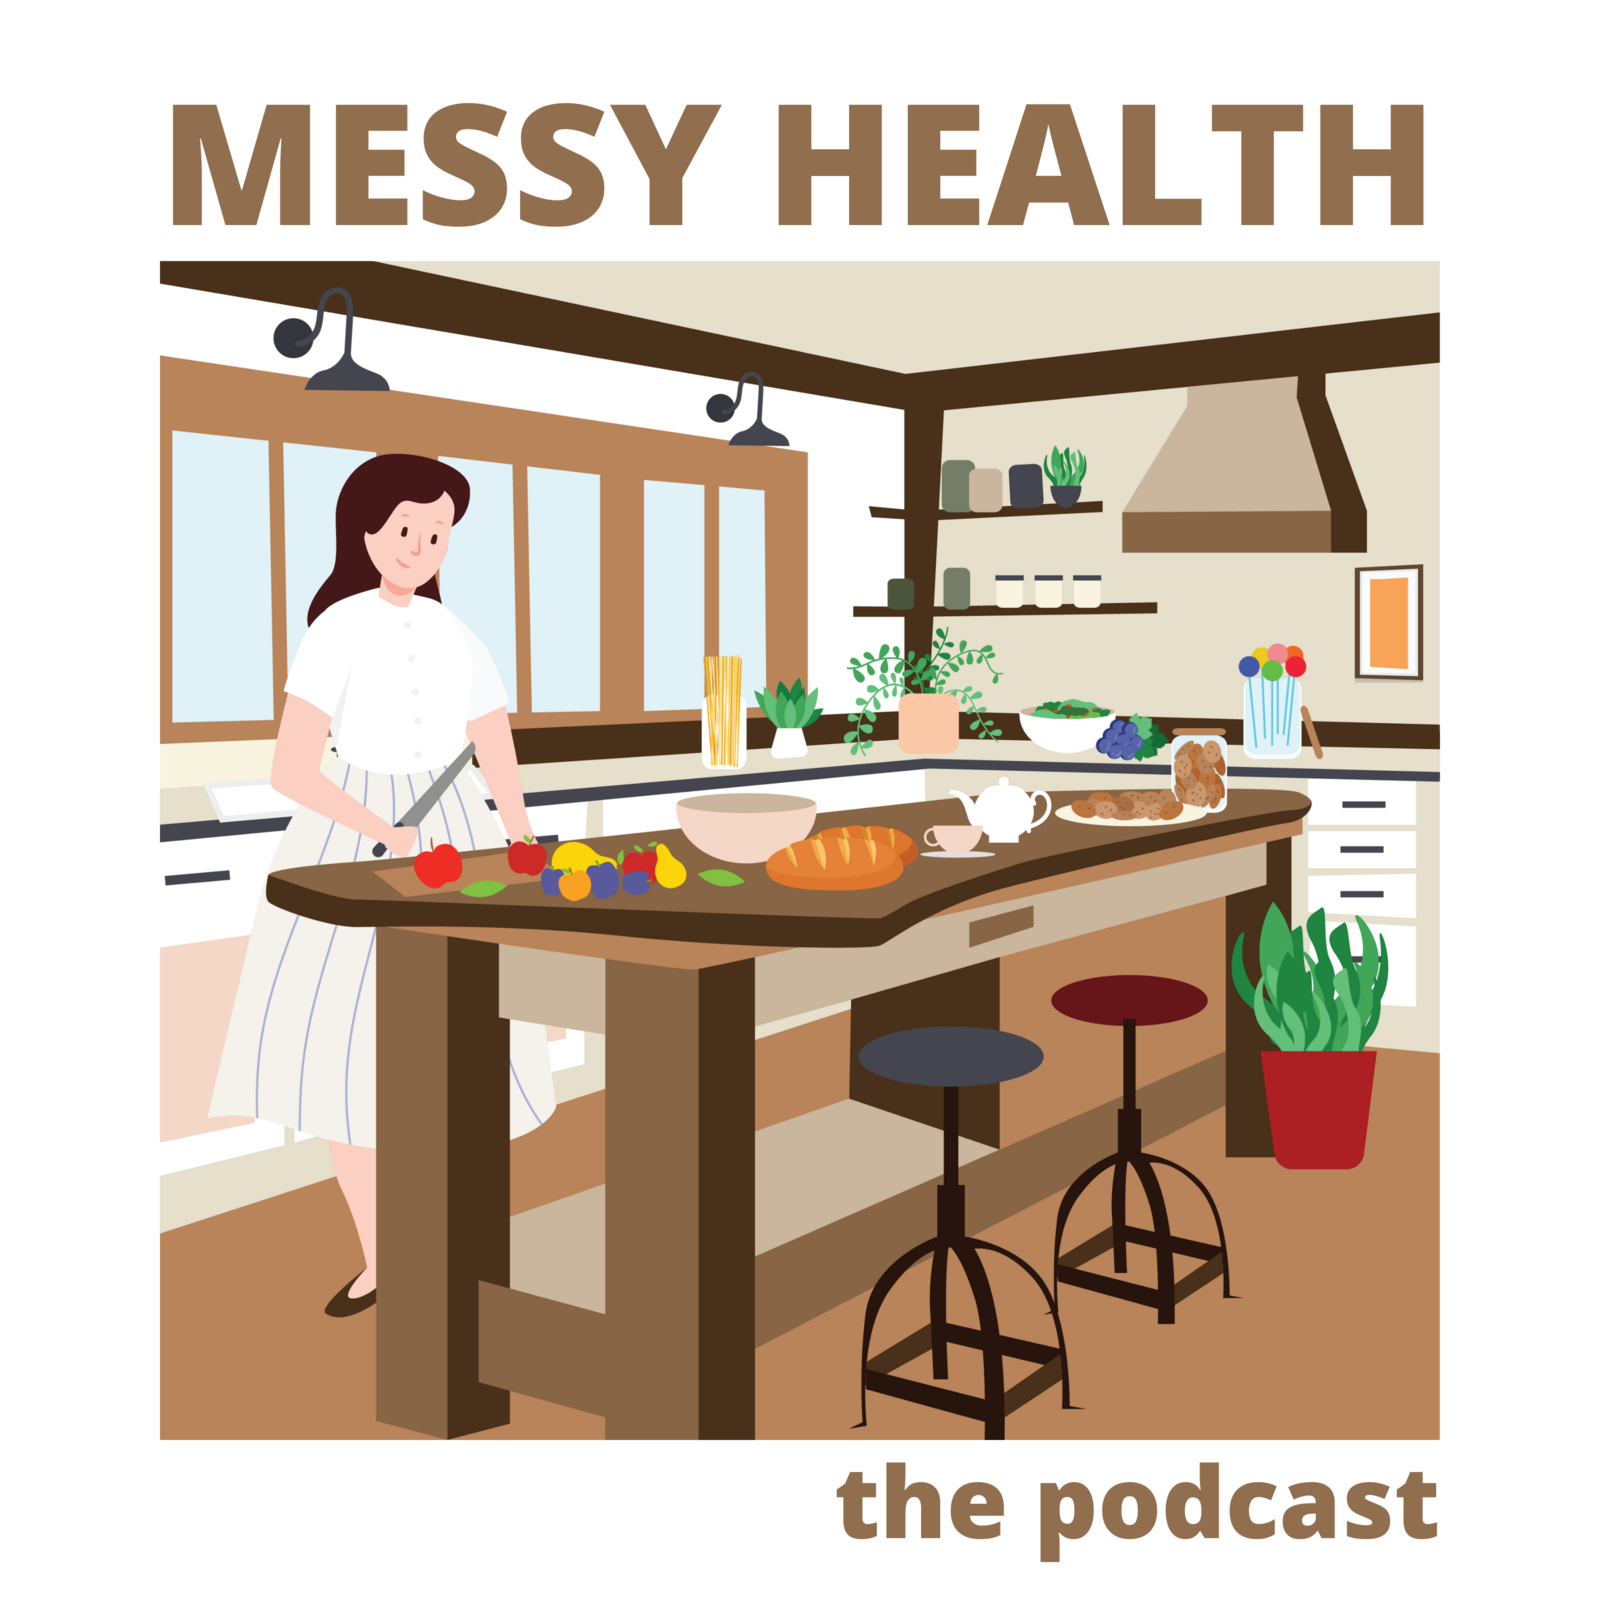 The Messy Health Podcast